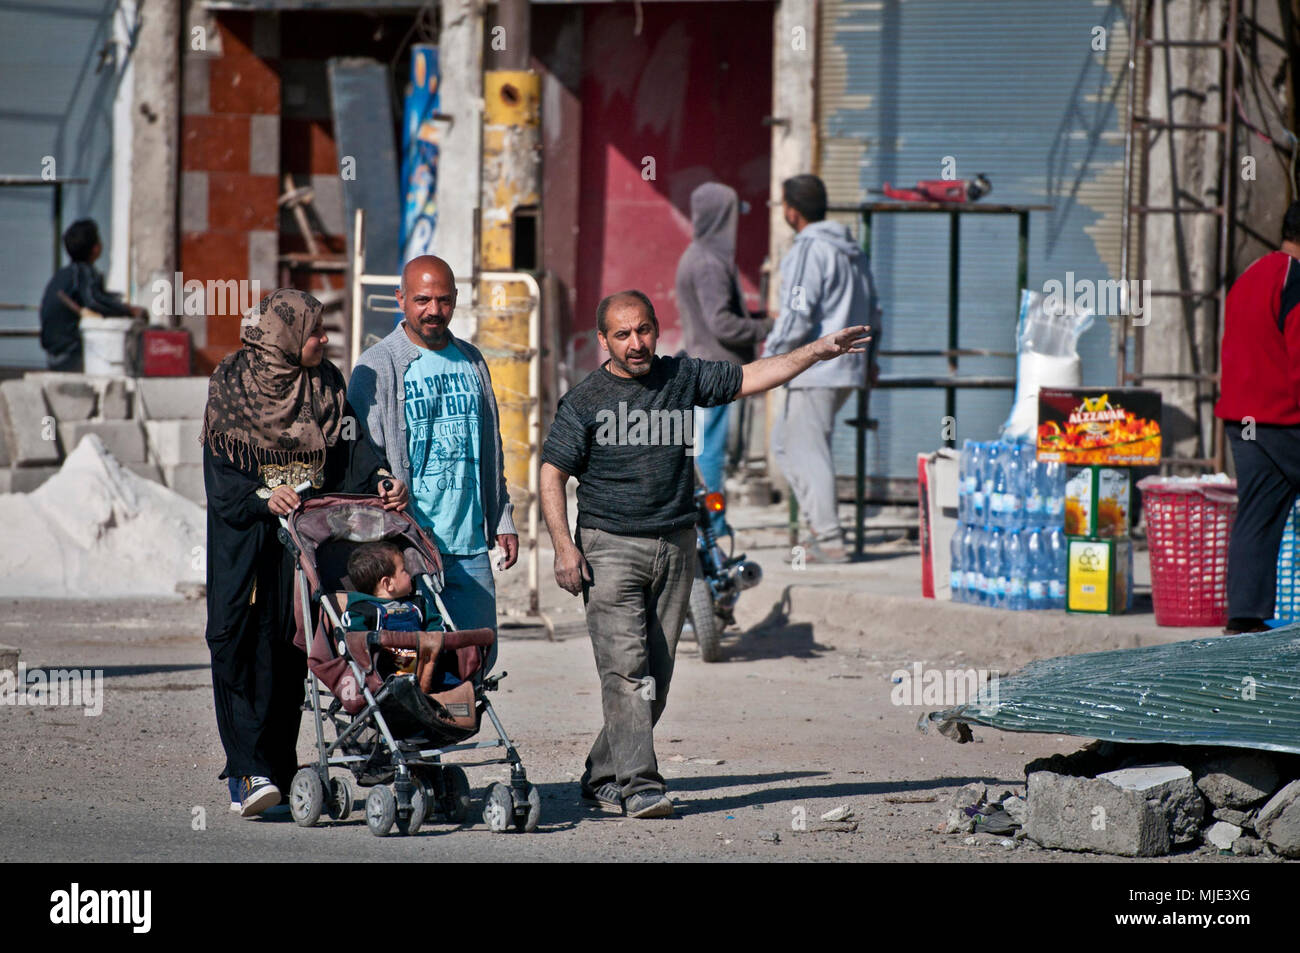 A Syrian family examines the reconstruction efforts and reopened markets near the Naim traffic circle, Raqqah, Syria, March 13, 2018. The return of vendors and markets are just one of the several signs that life is beginning to return to normal after the Syrian Democratic Forces, under the advisement of the Global Coalition to Defeat the Islamic State of Iraq and Syria, militarily defeated ISIS in the city. (U.S. Army Stock Photo